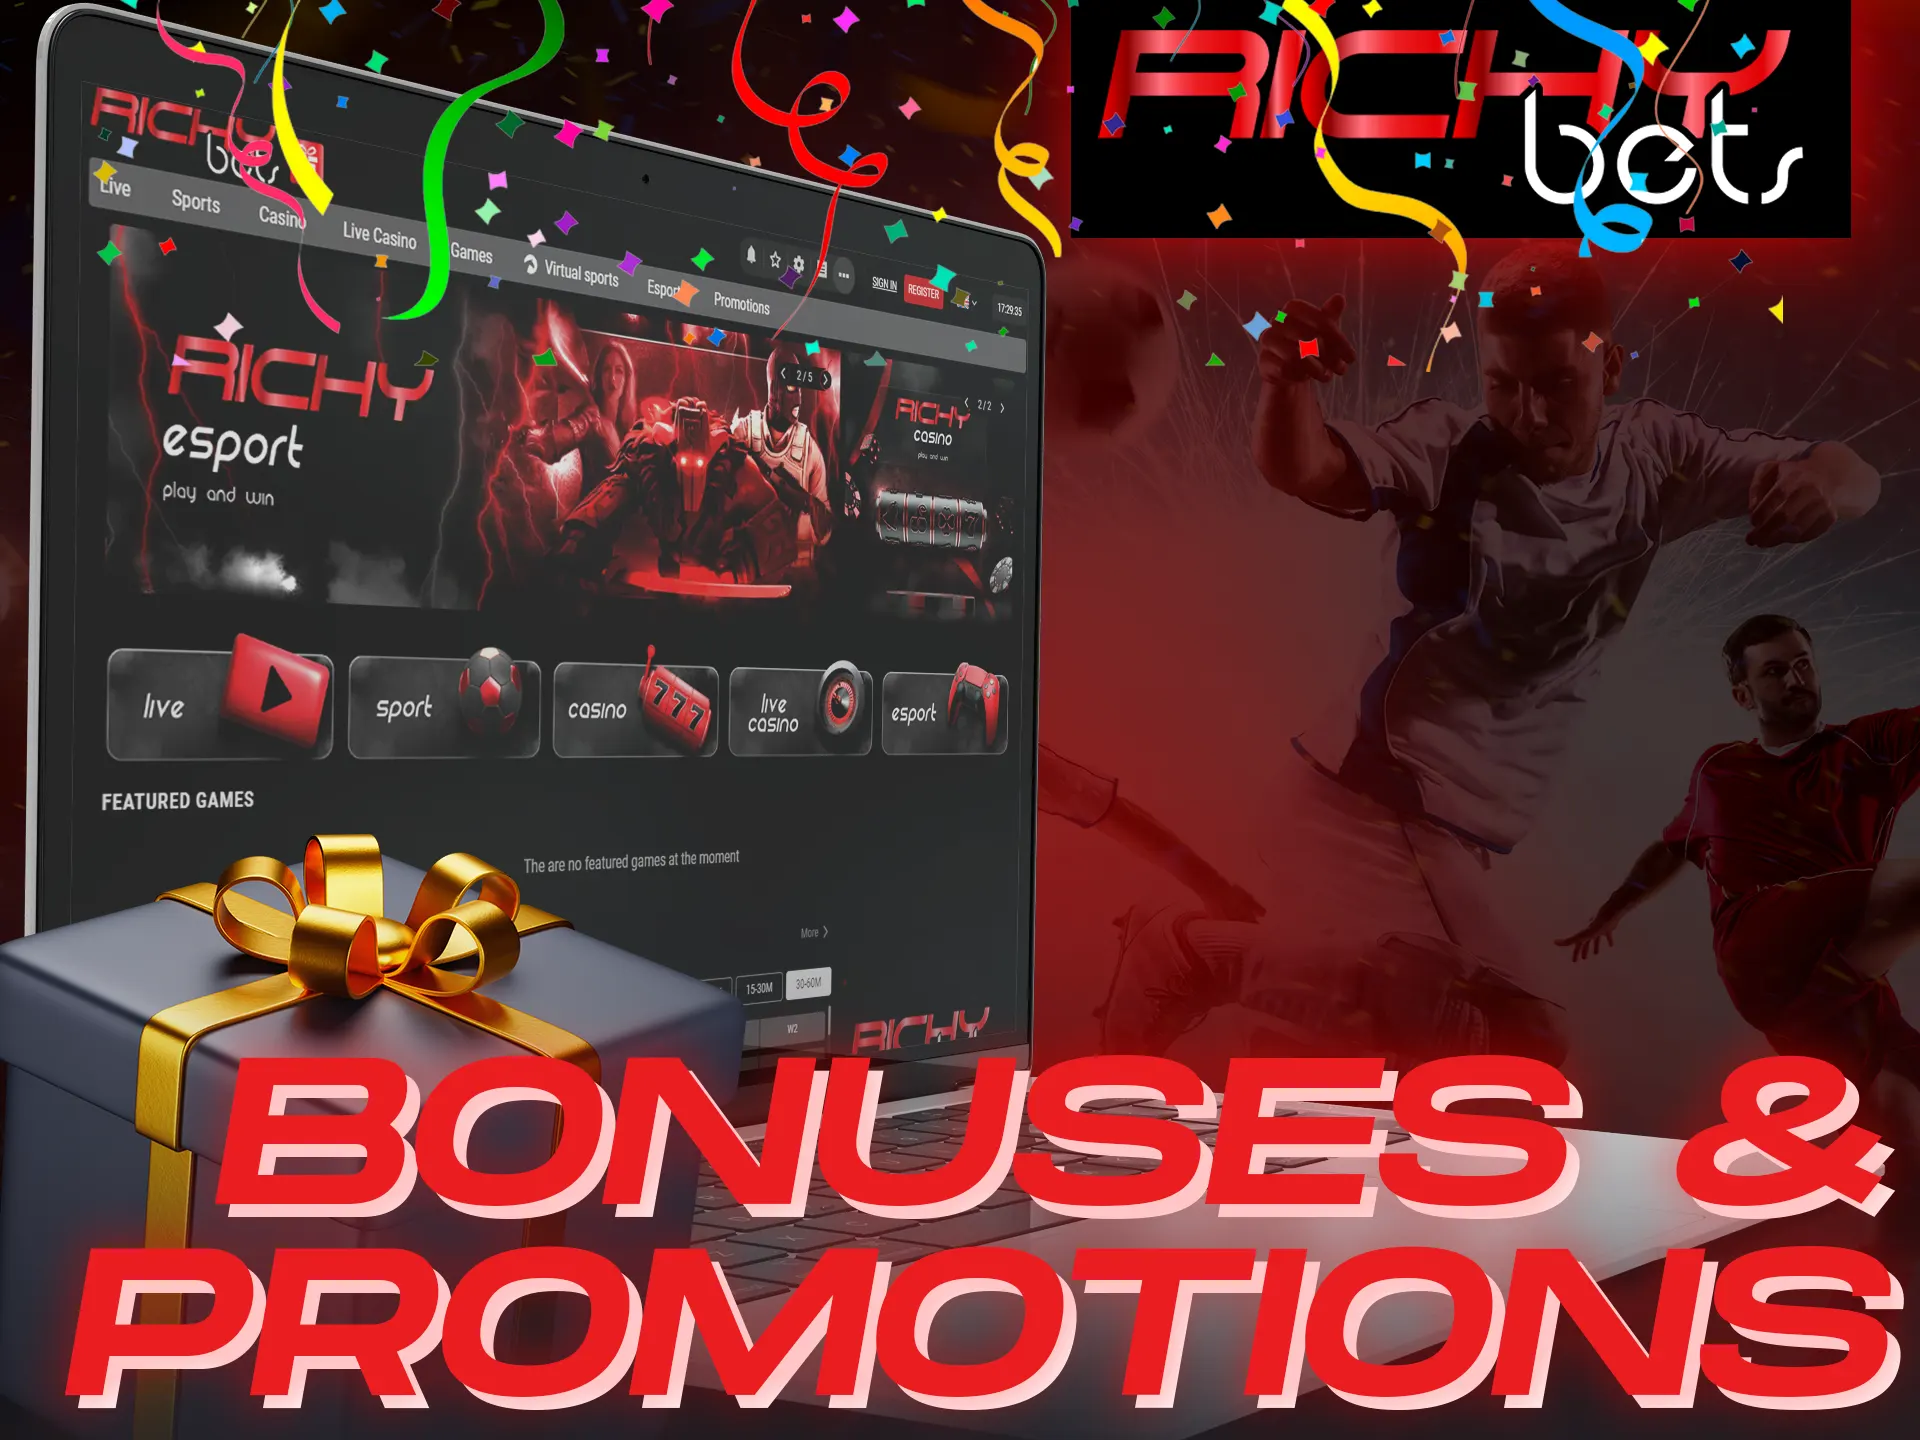 Check for the new Richybets promotions on the bonuses page.